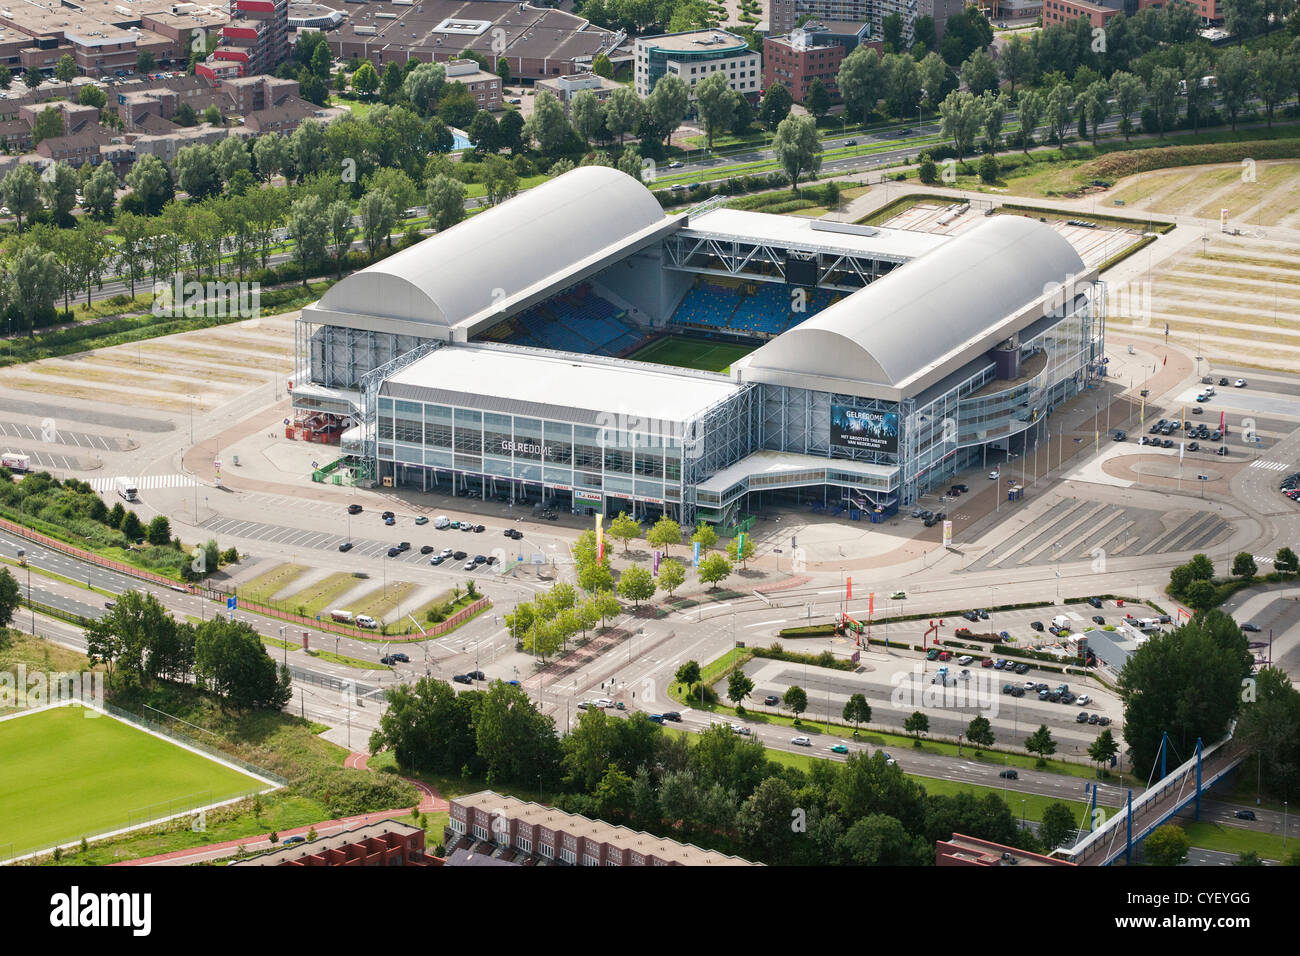 The Netherlands, Arnhem, Football and events stadium called Gelredome. Aerial. Stock Photo